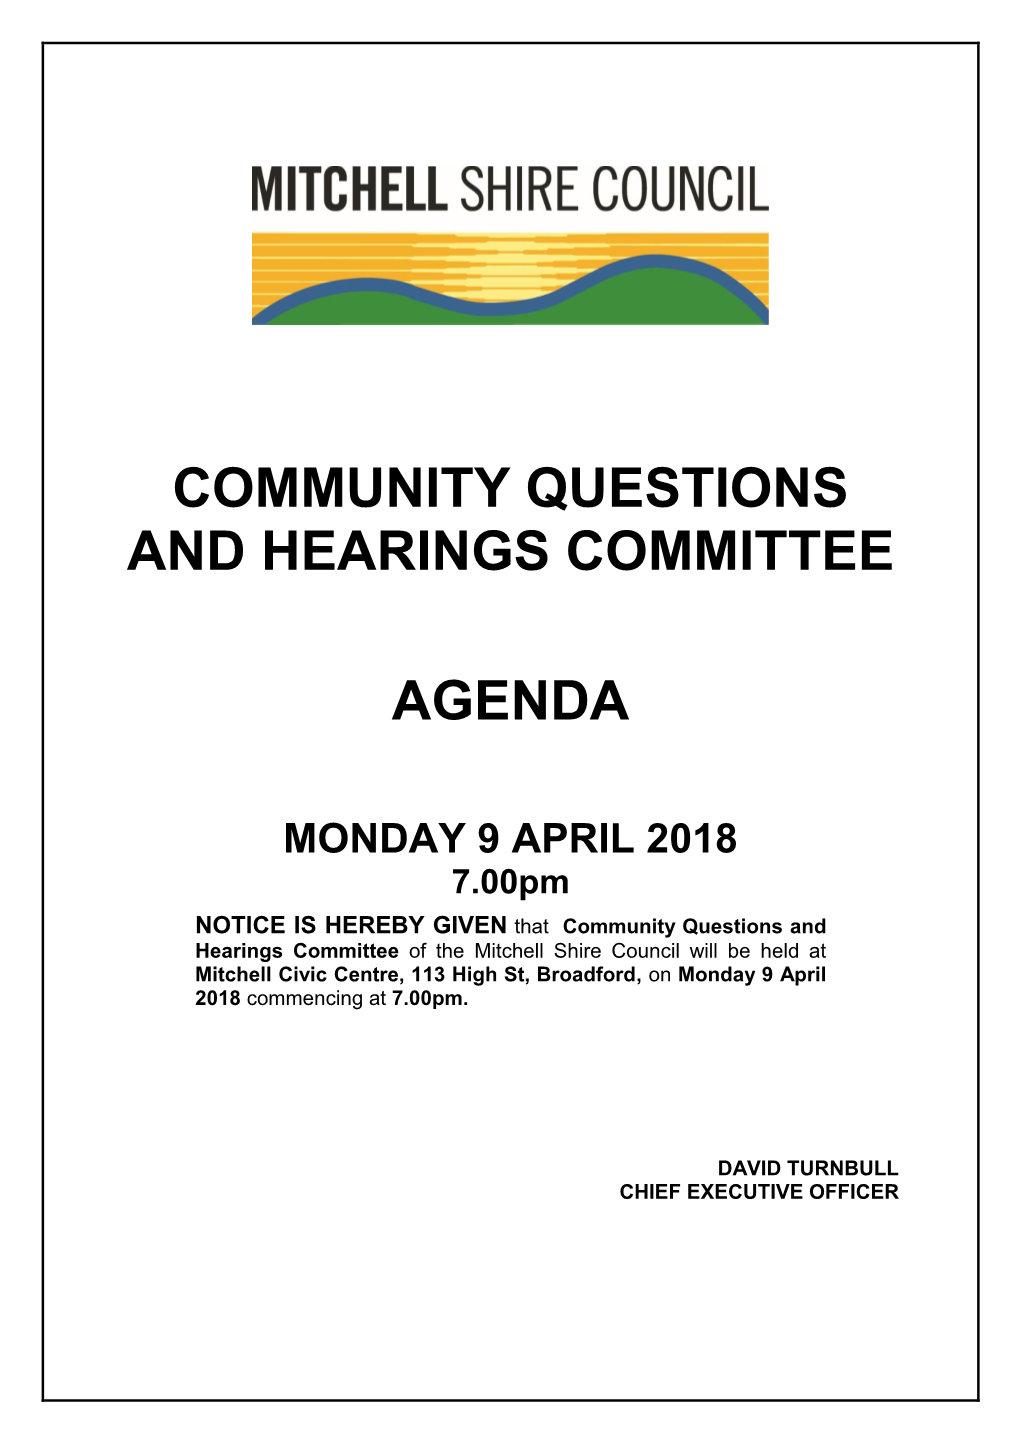 Agenda of Community Questions and Hearings